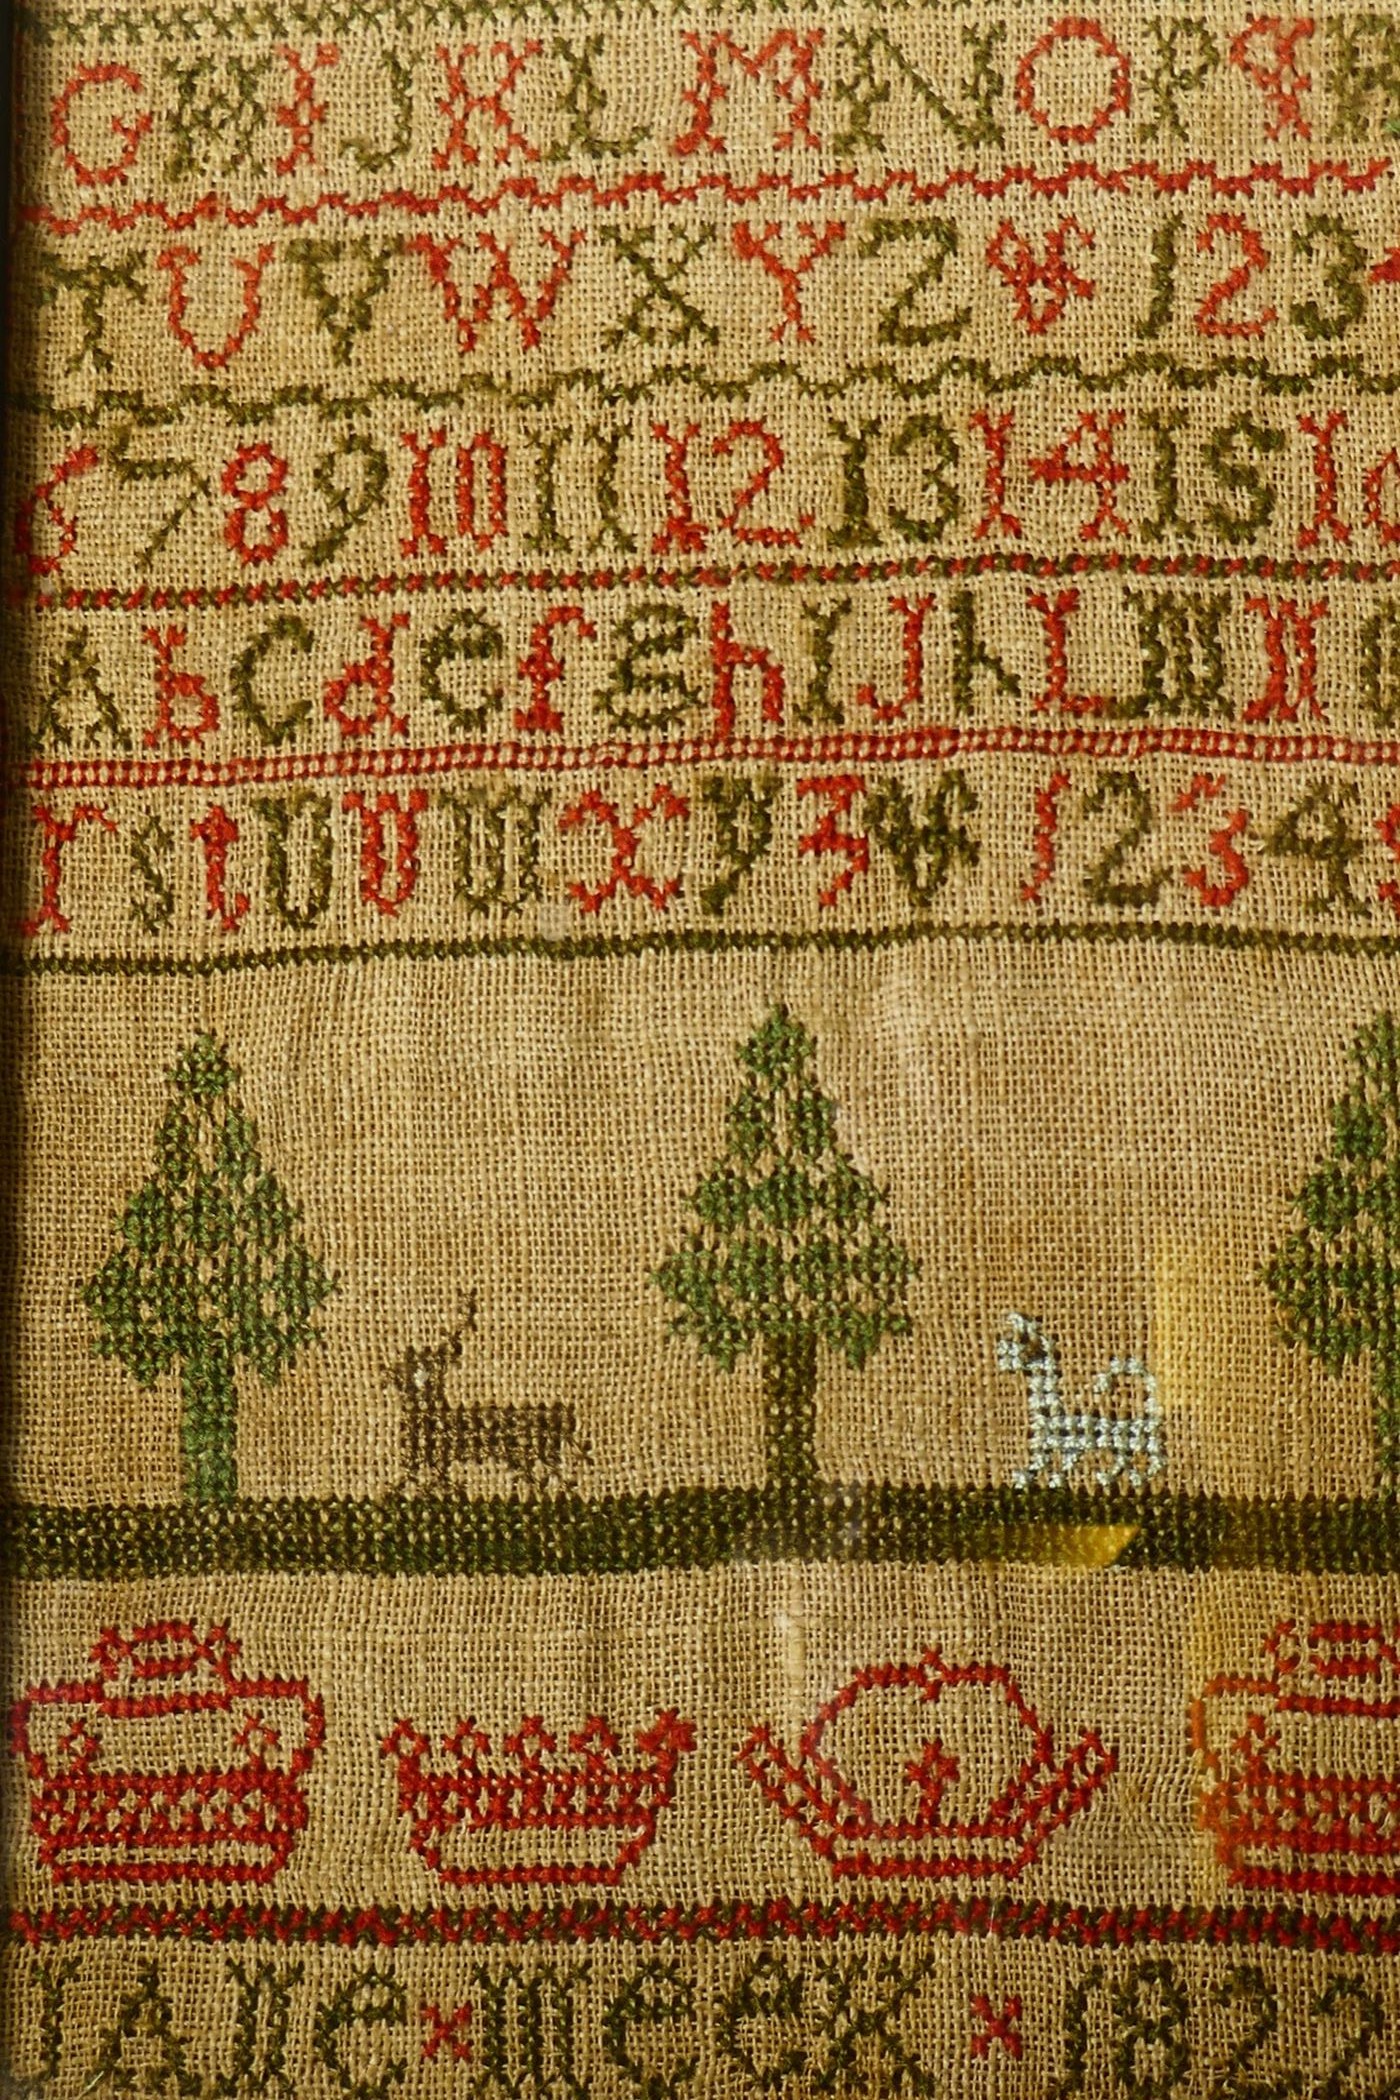 An early C19th hand stitched sampler in cross stitch by 'Jane Meek - 1822' (sister of Janet Meek), - Image 2 of 7